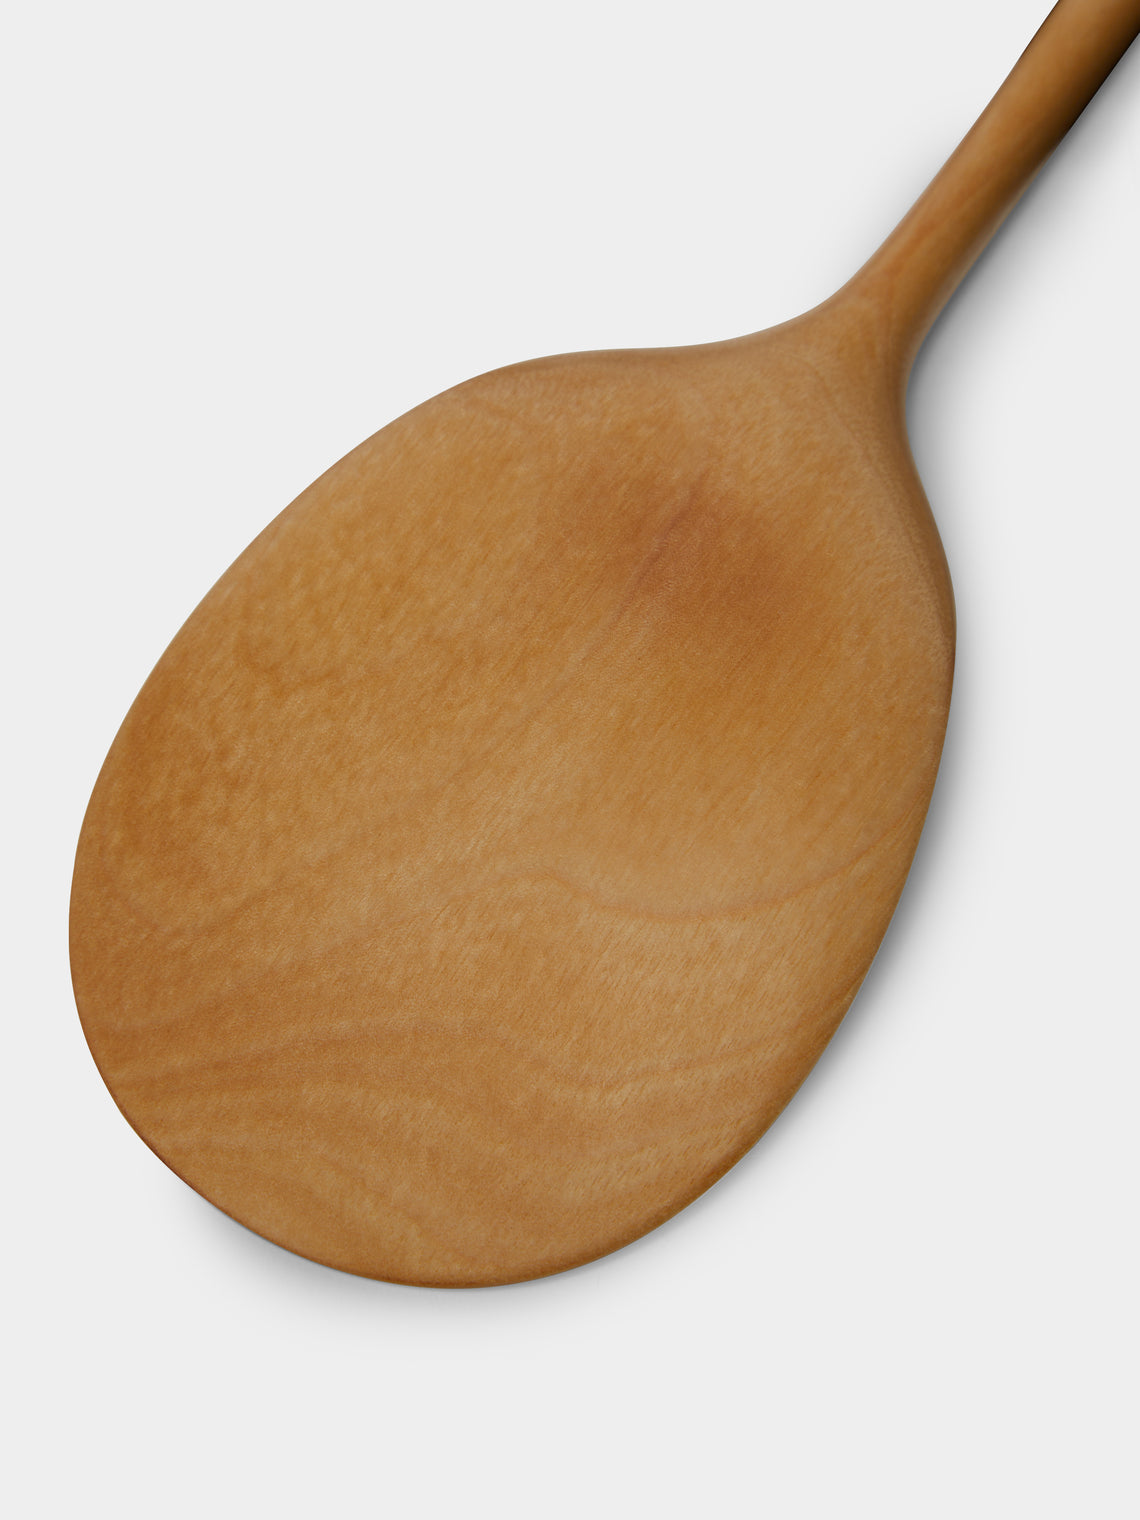 Jaejin Choi - Hand-Etched Birch Rice Paddle -  - ABASK